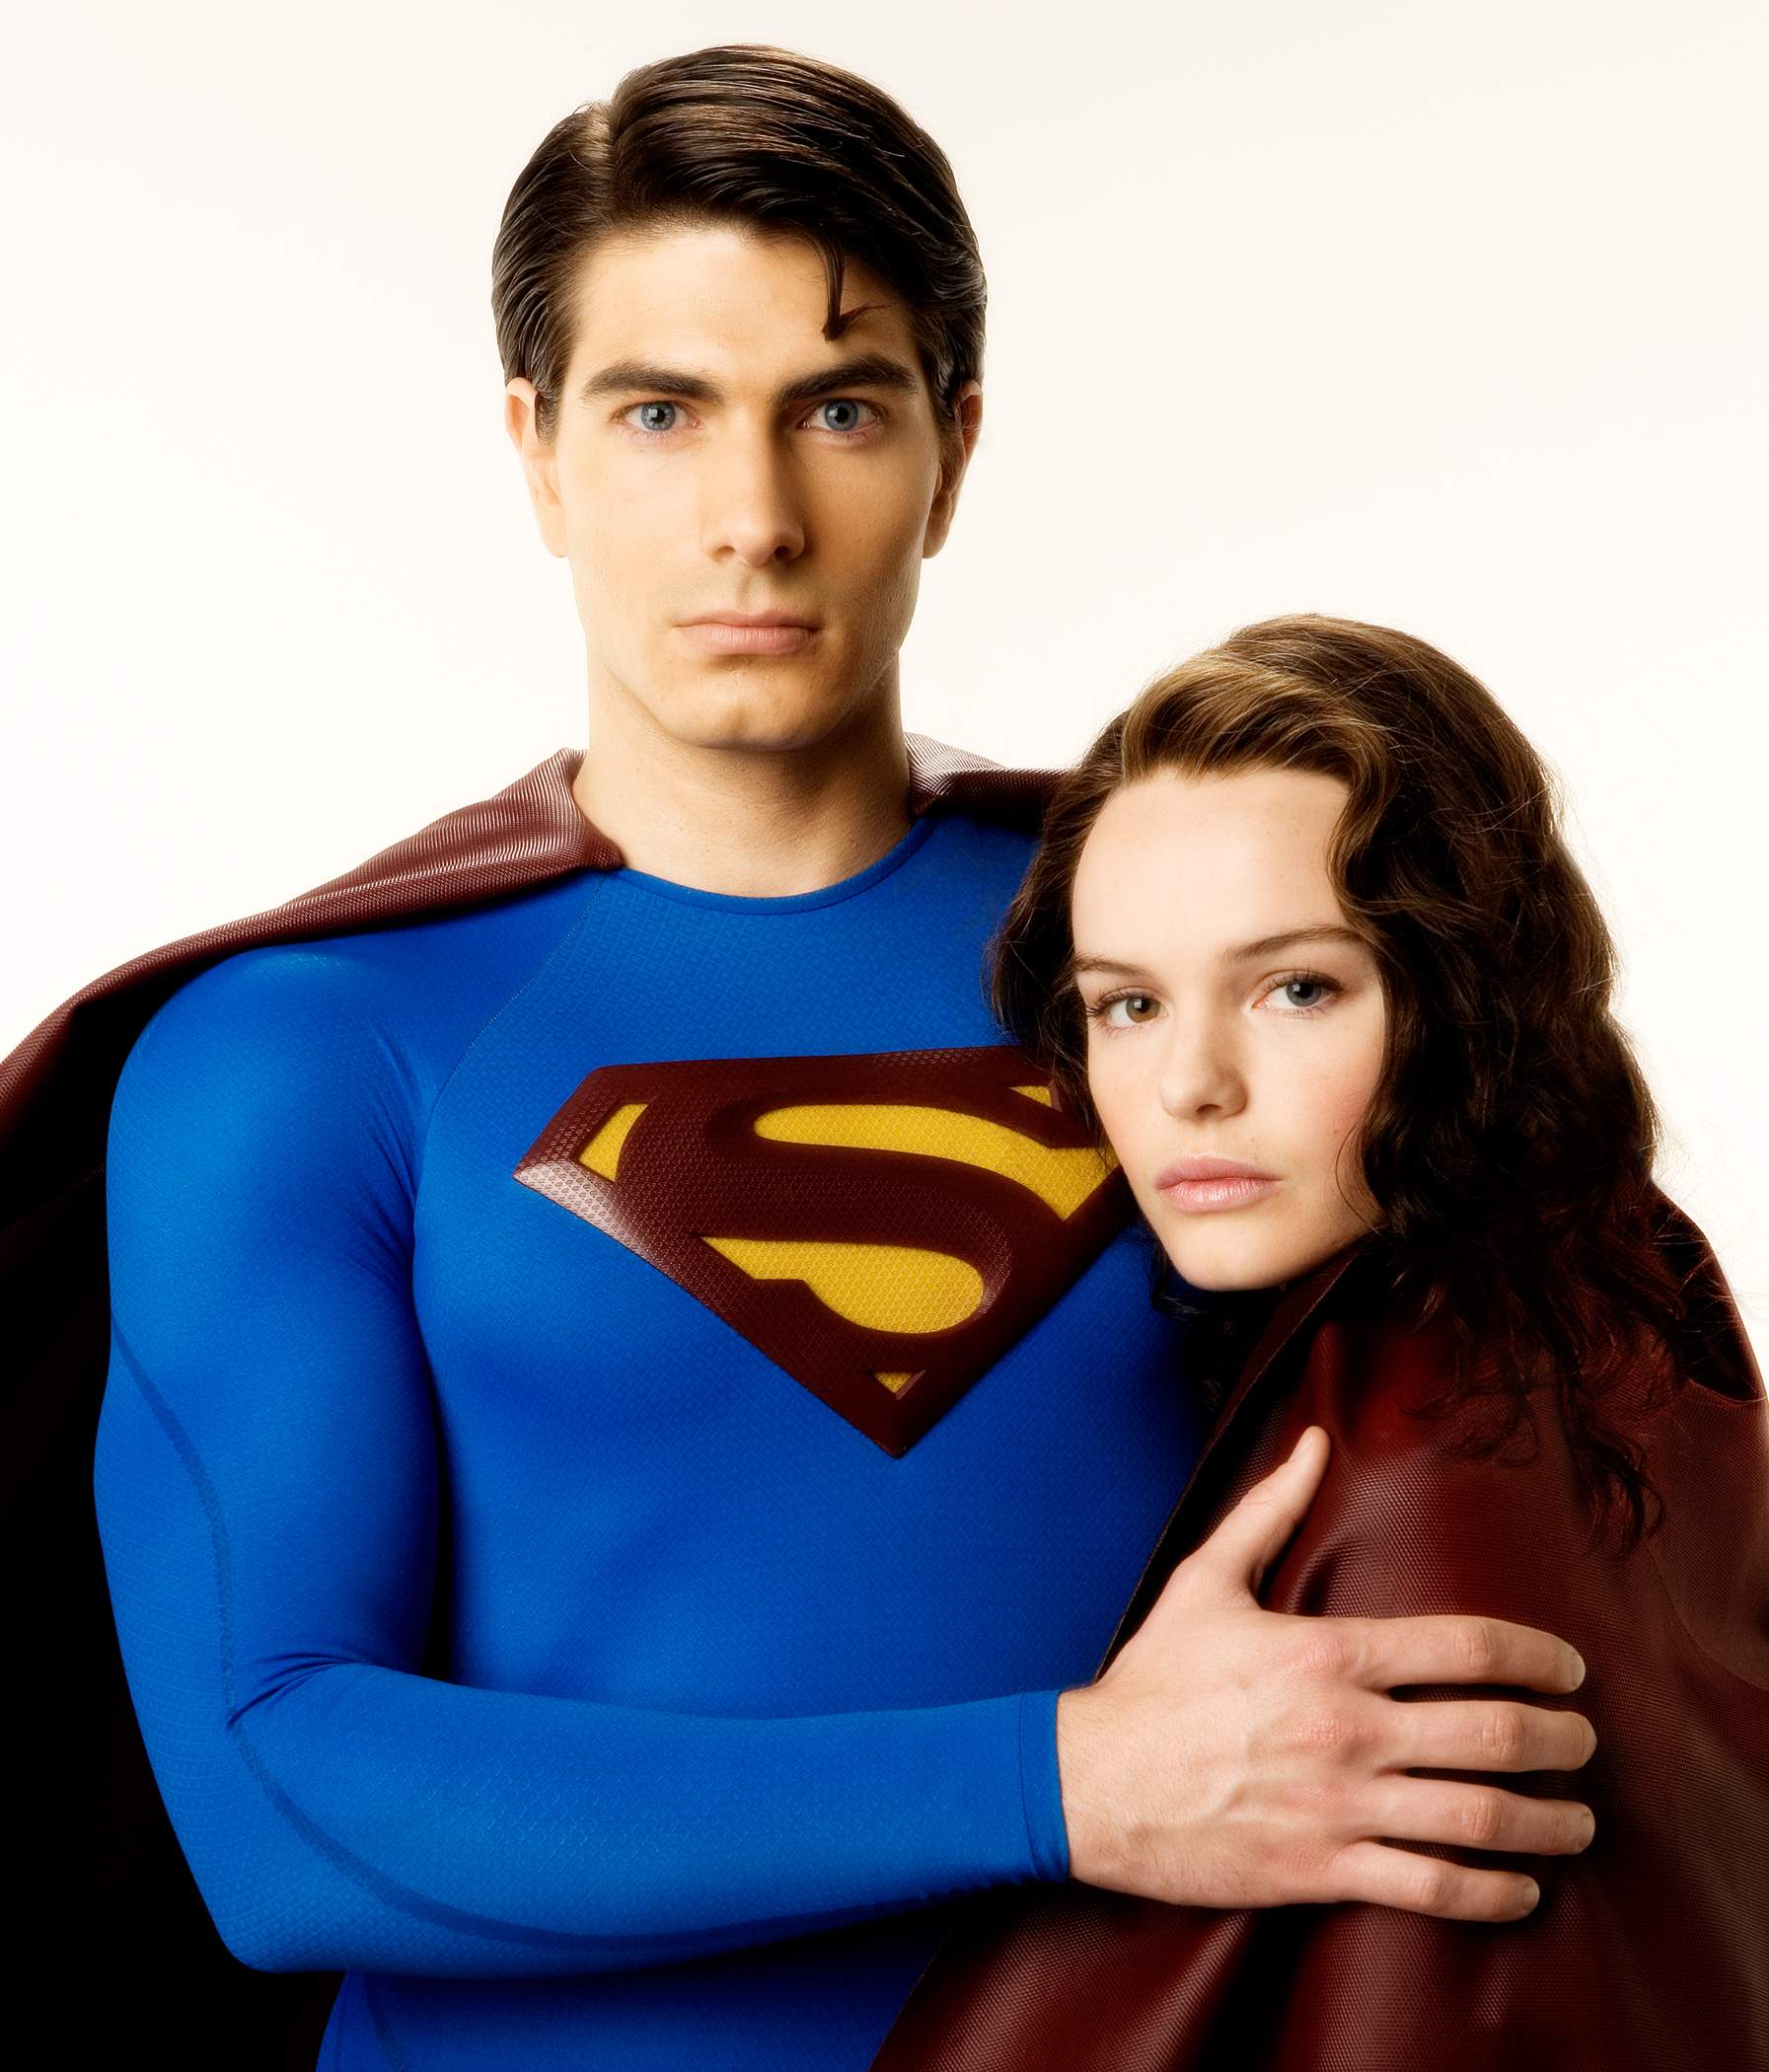 Brandon Routh and Kate Bosworth in Warner Bros Pictures' Superman Returns (2006)